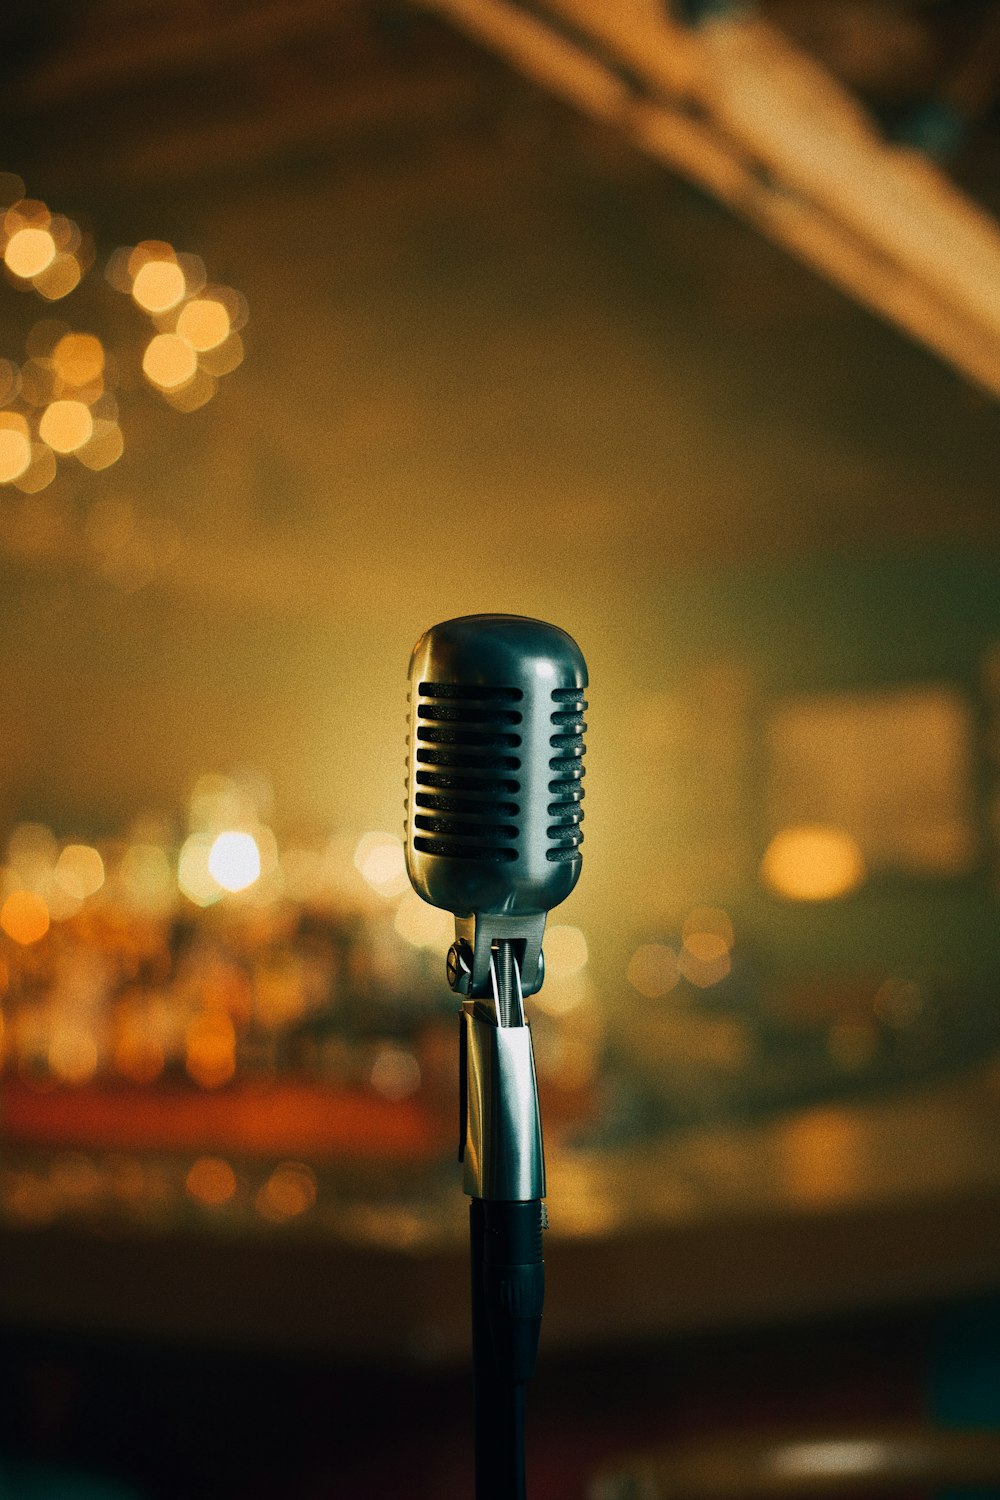 750+ Mic Pictures | Download Free Images & Stock Photos on Unsplash